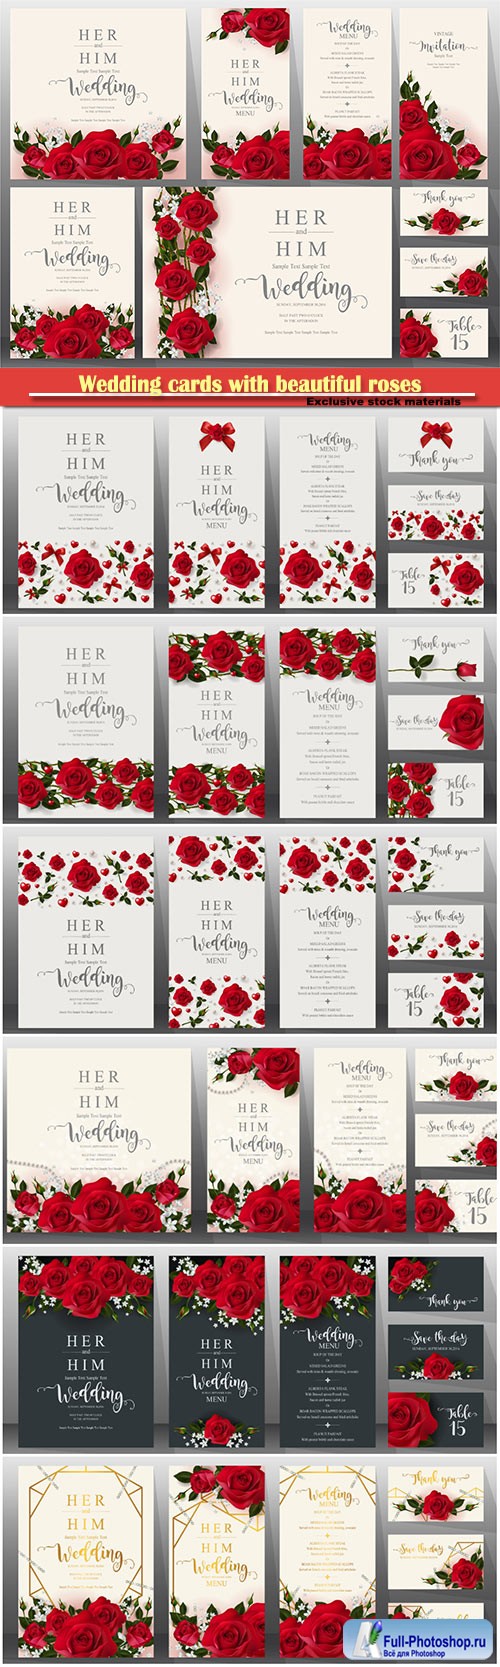 Wedding cards with beautiful roses vector illustration